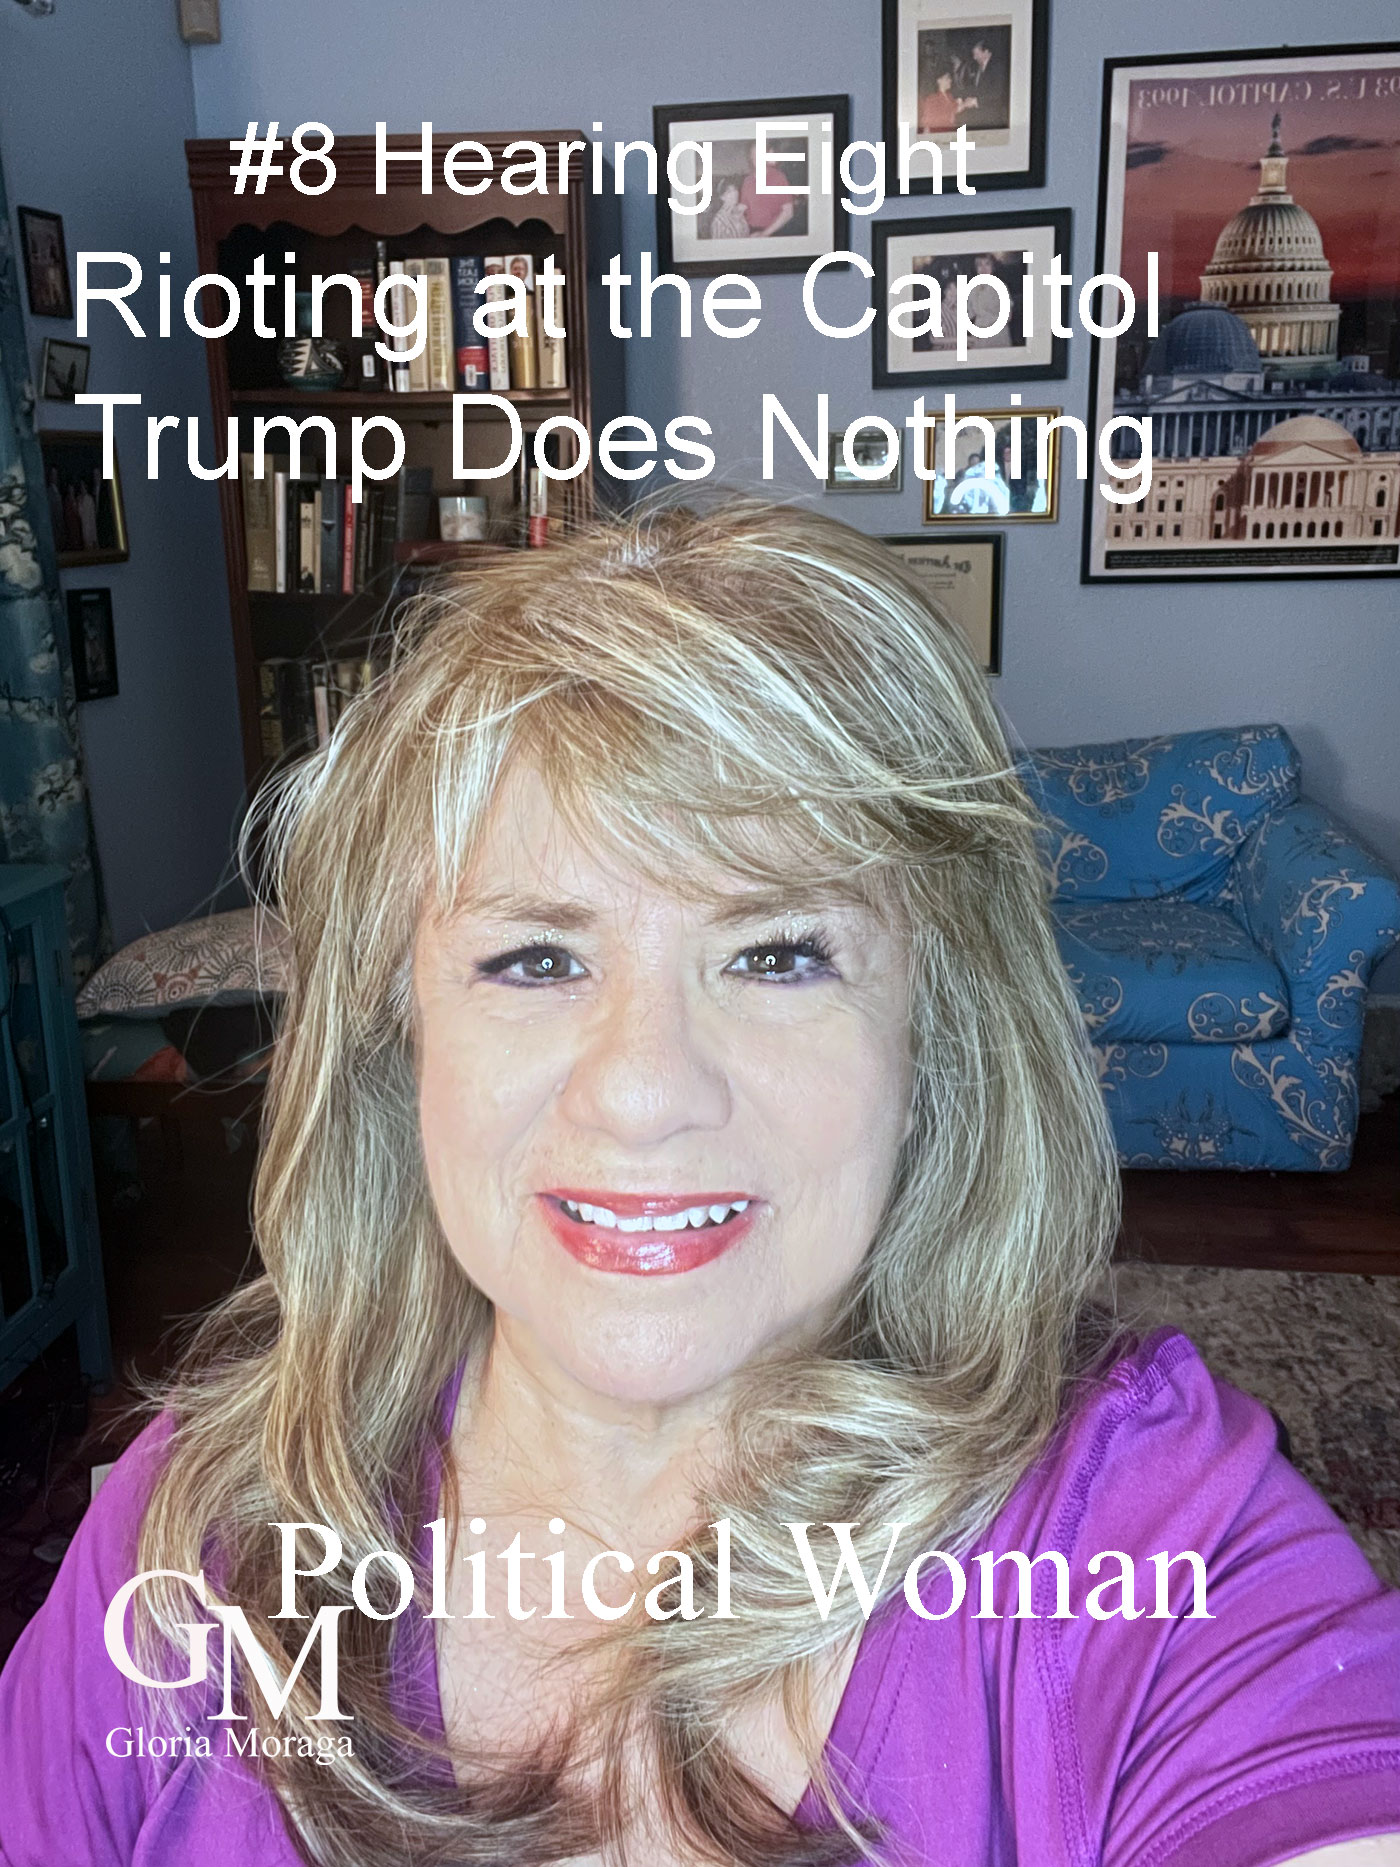 Rioting at the Capitol - Trump Does Nothing